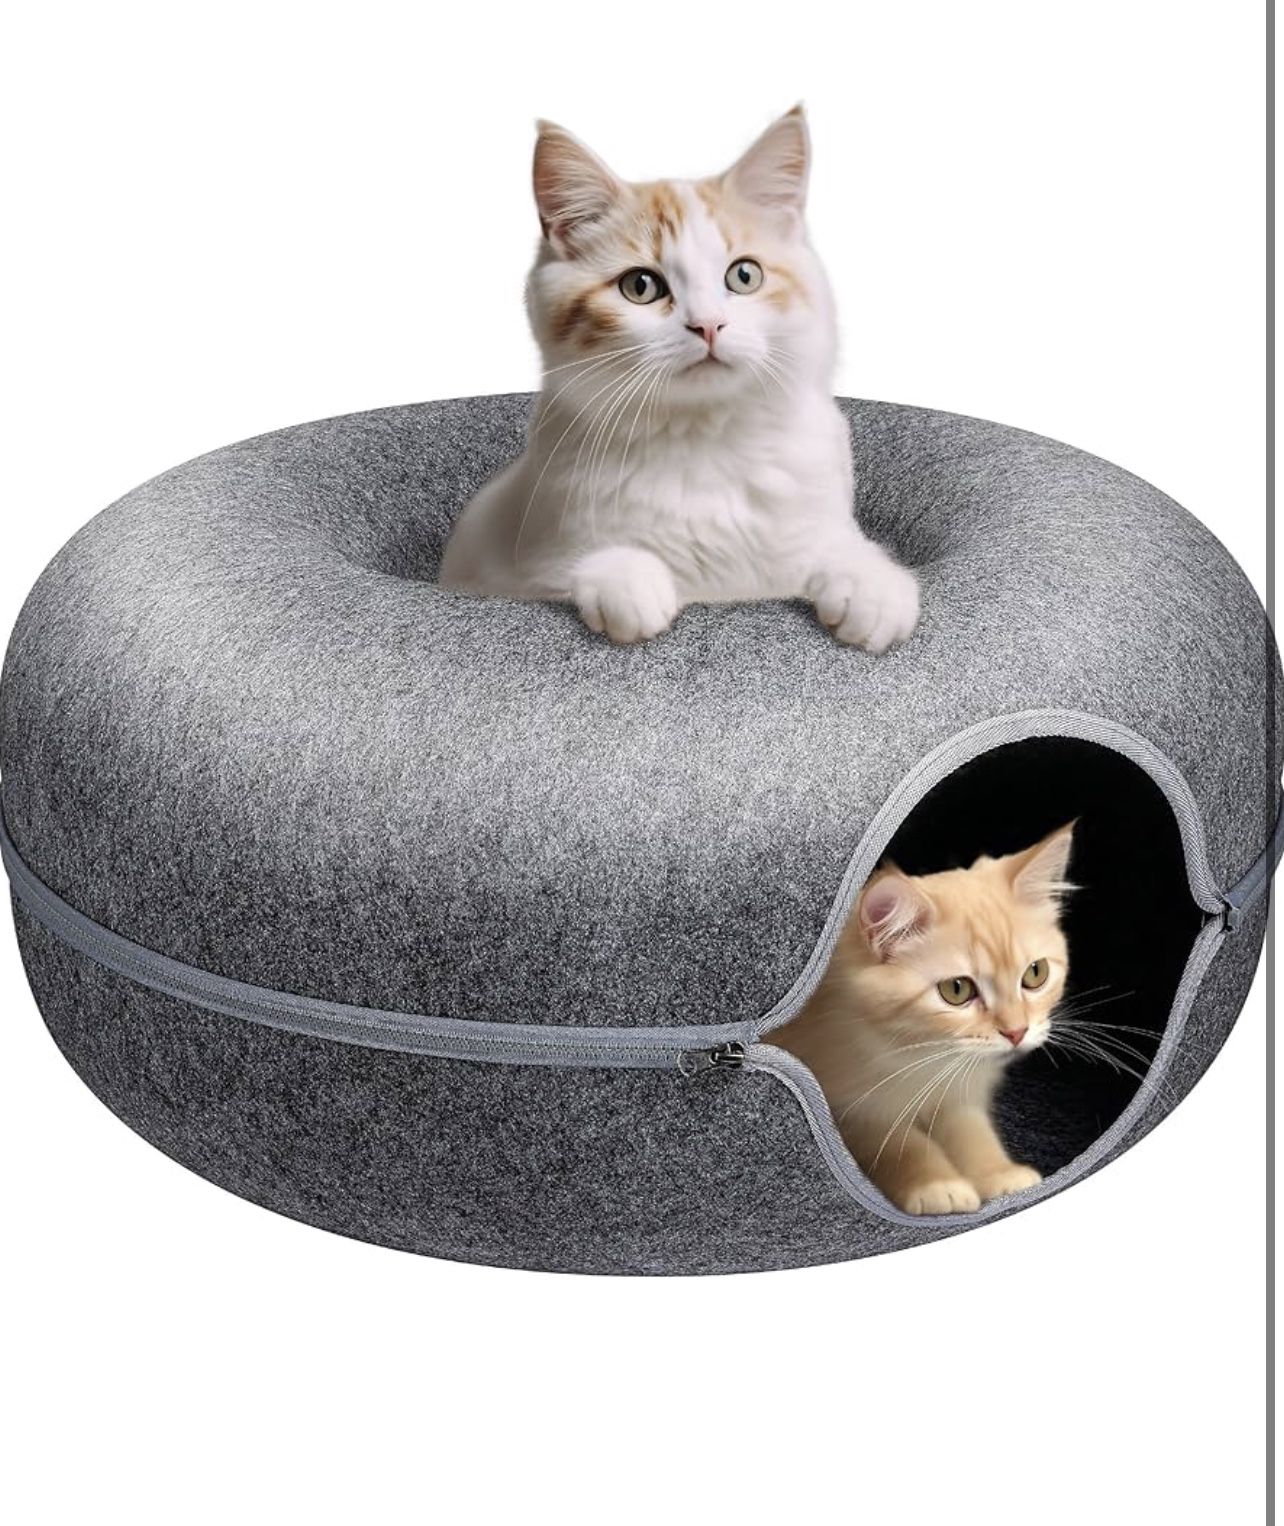 Peekaboo Cat Cave for Multiple Cats/Large Cats, Cat Caves for Indoor Cats Up to 9 Lbs, Cat Tunnel Bed, Scratch Detachable and Washable Large Donut Cat